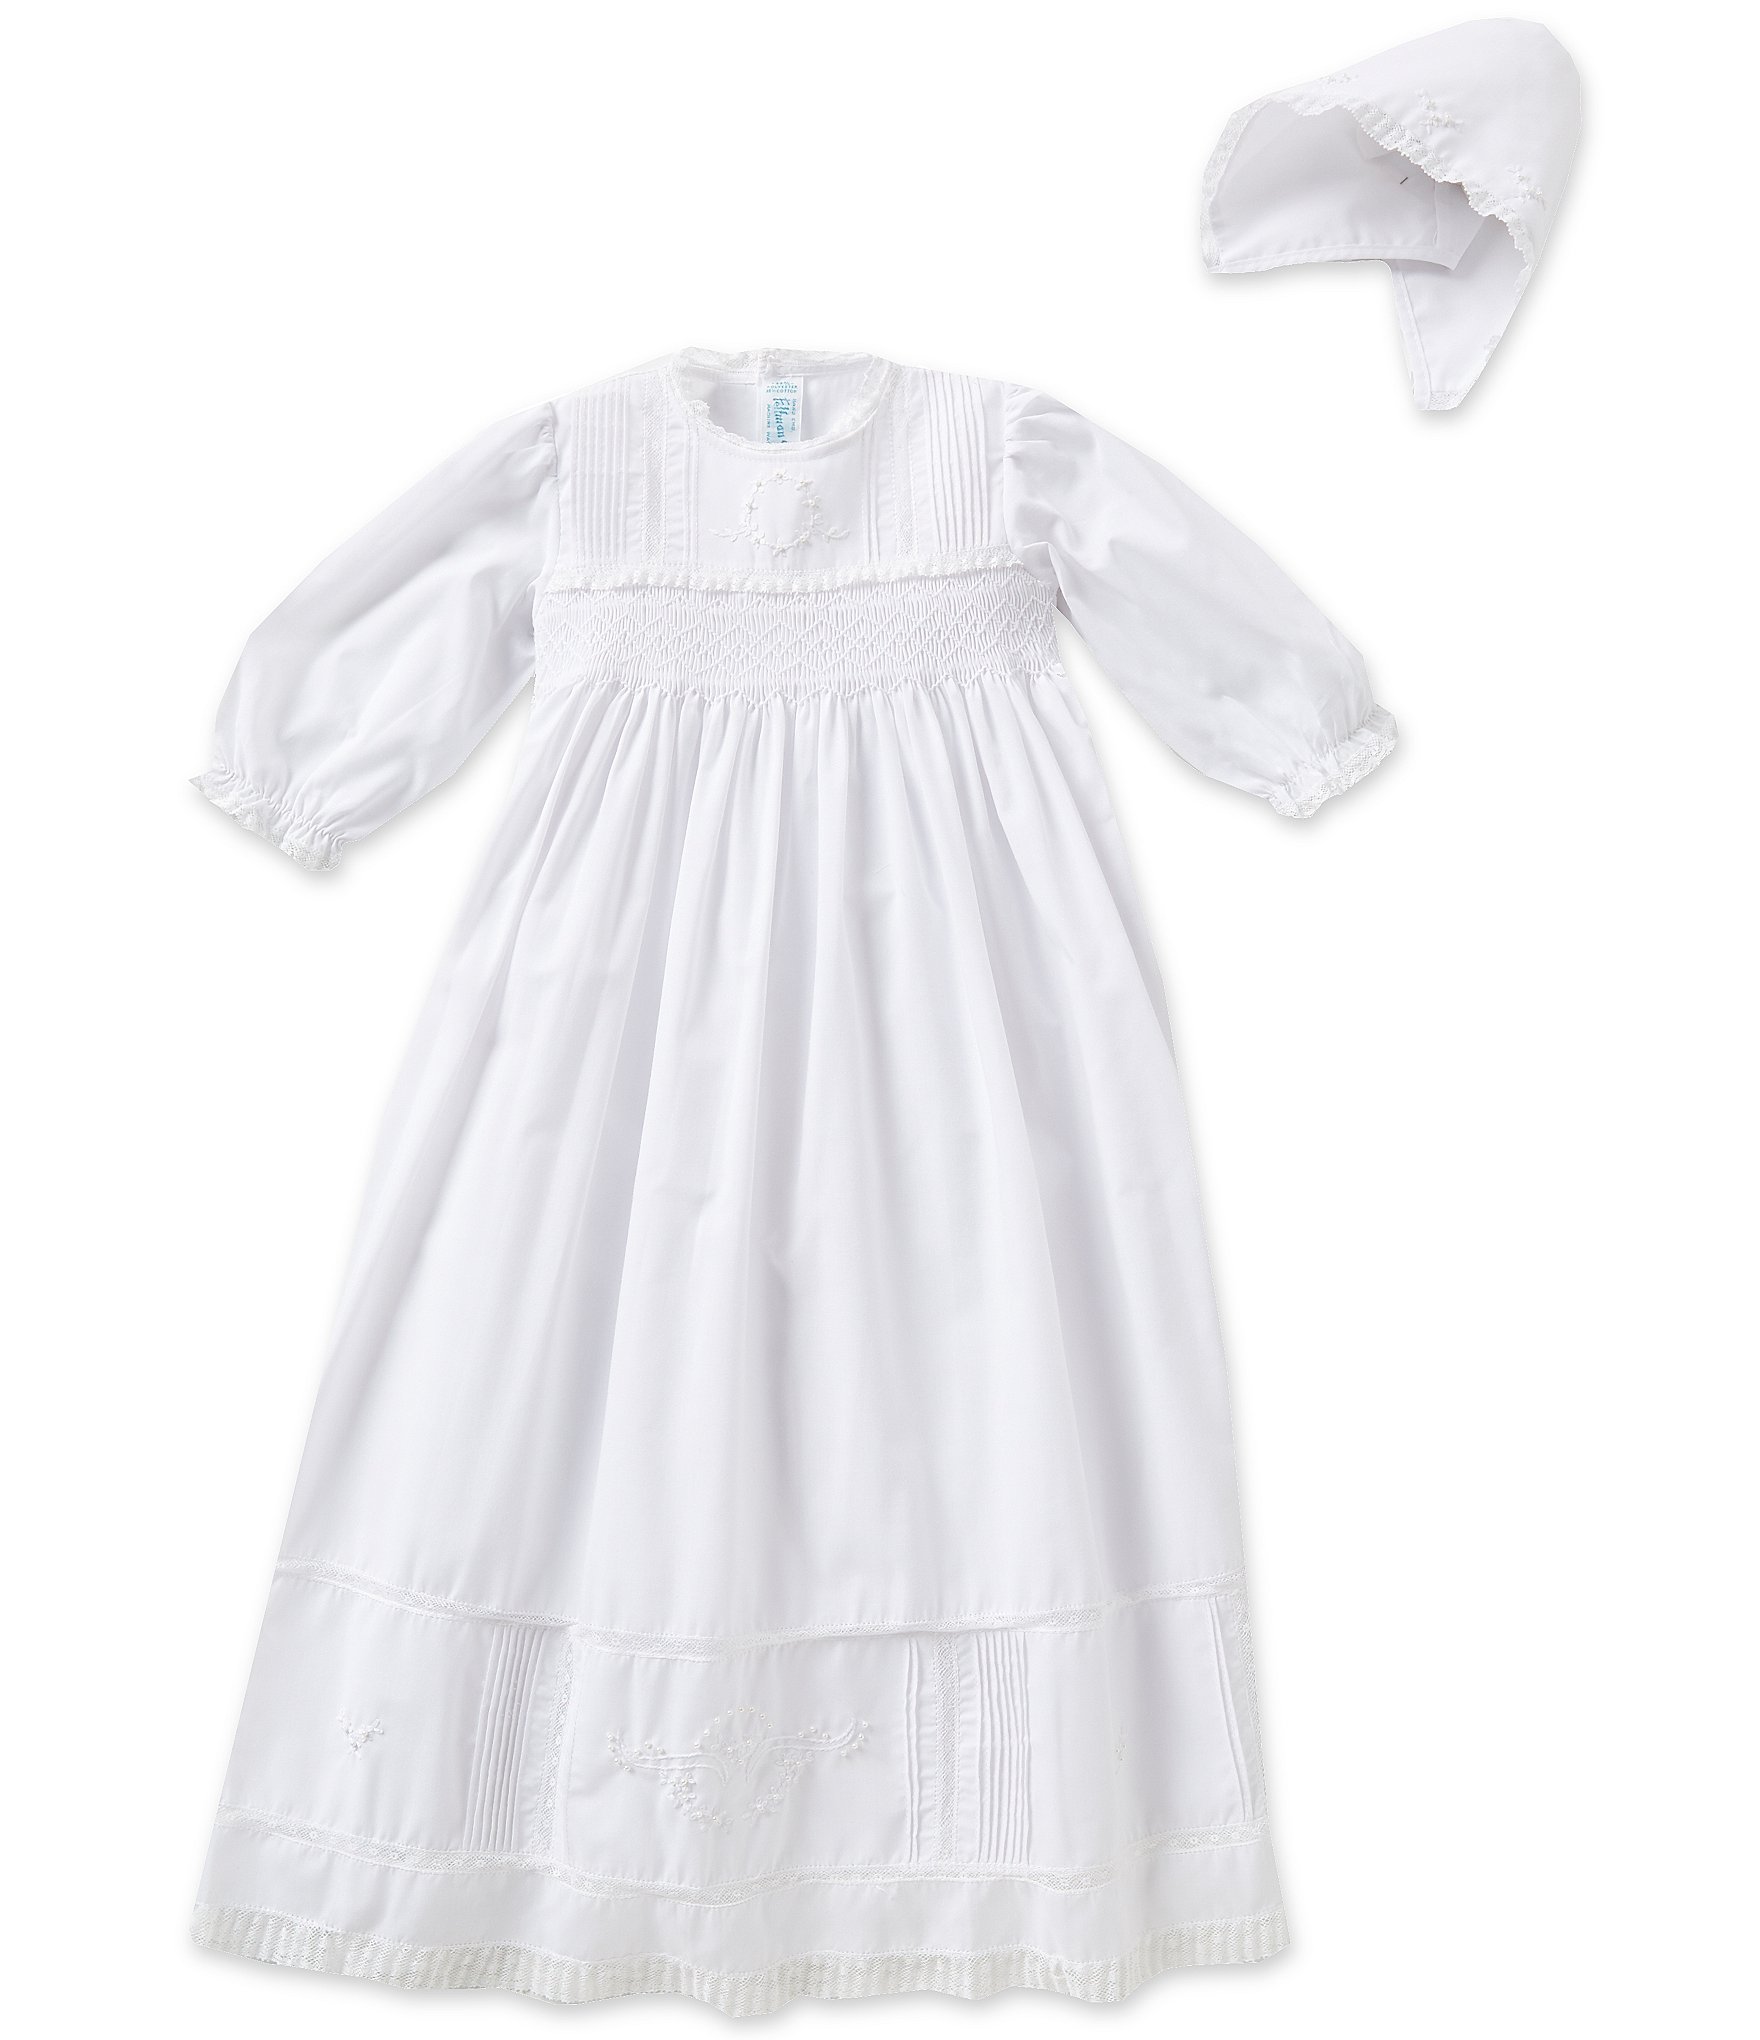 Feltman Brothers Infant Girls White Christening Baptism Gown NB/3M 